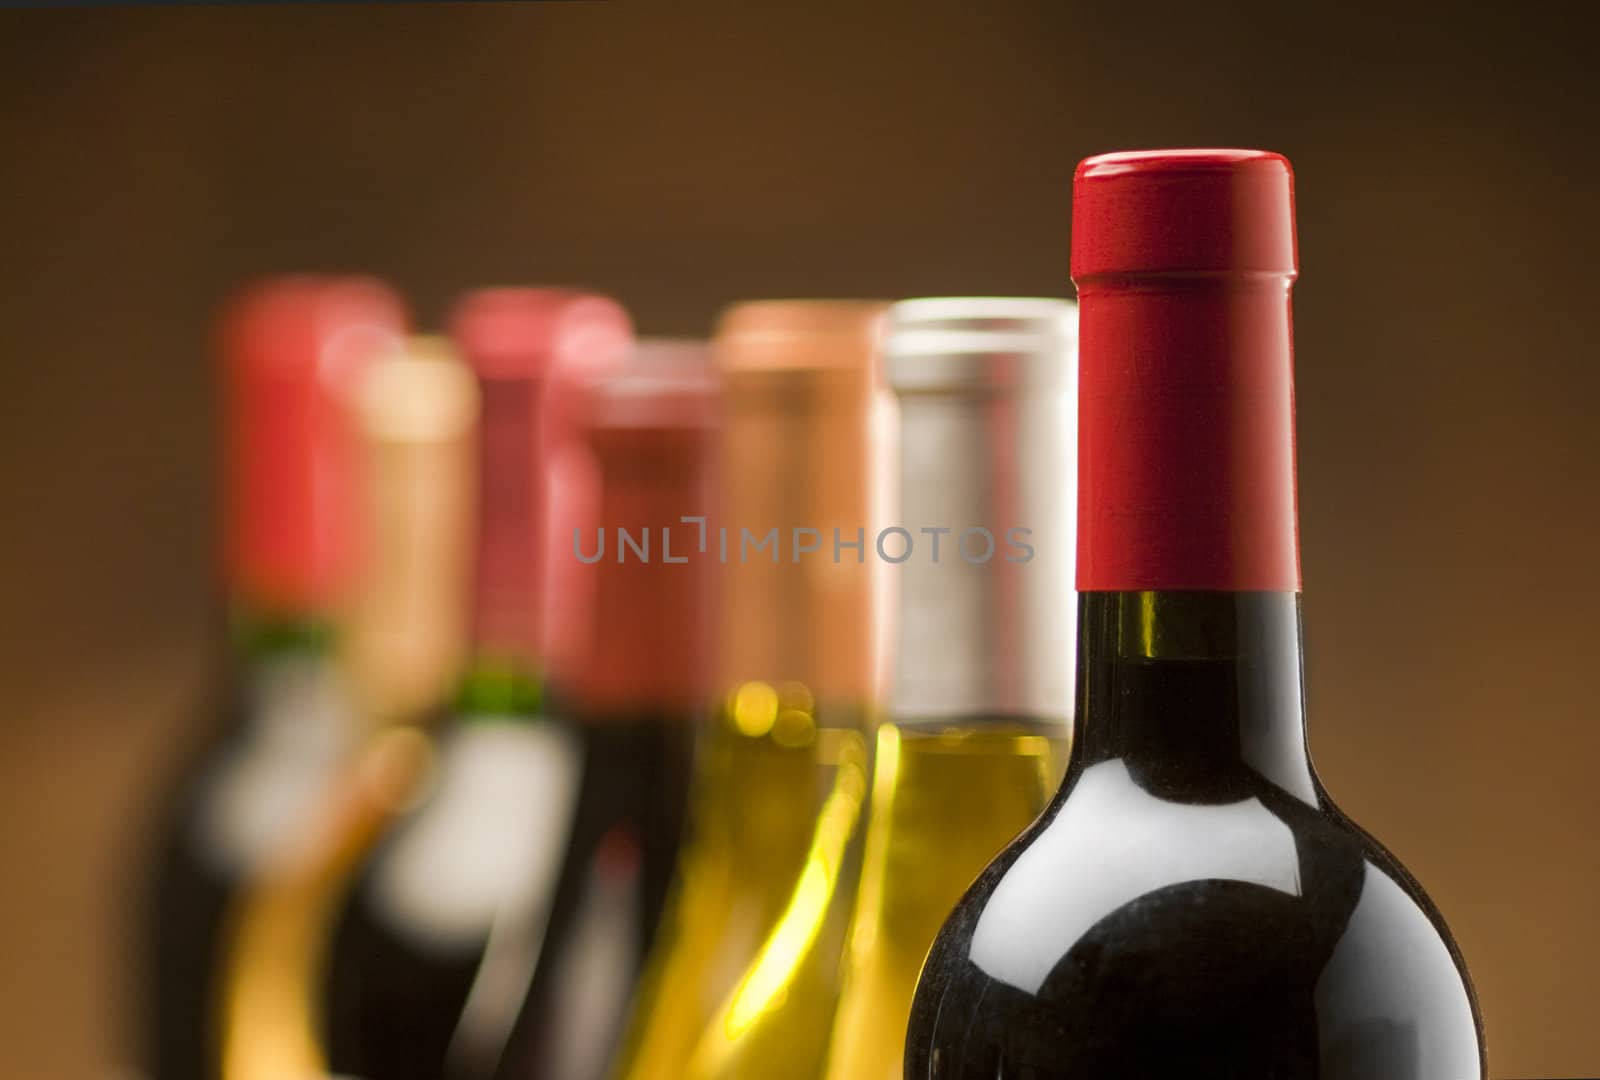 Red wine bottles in focus with limited depth of field